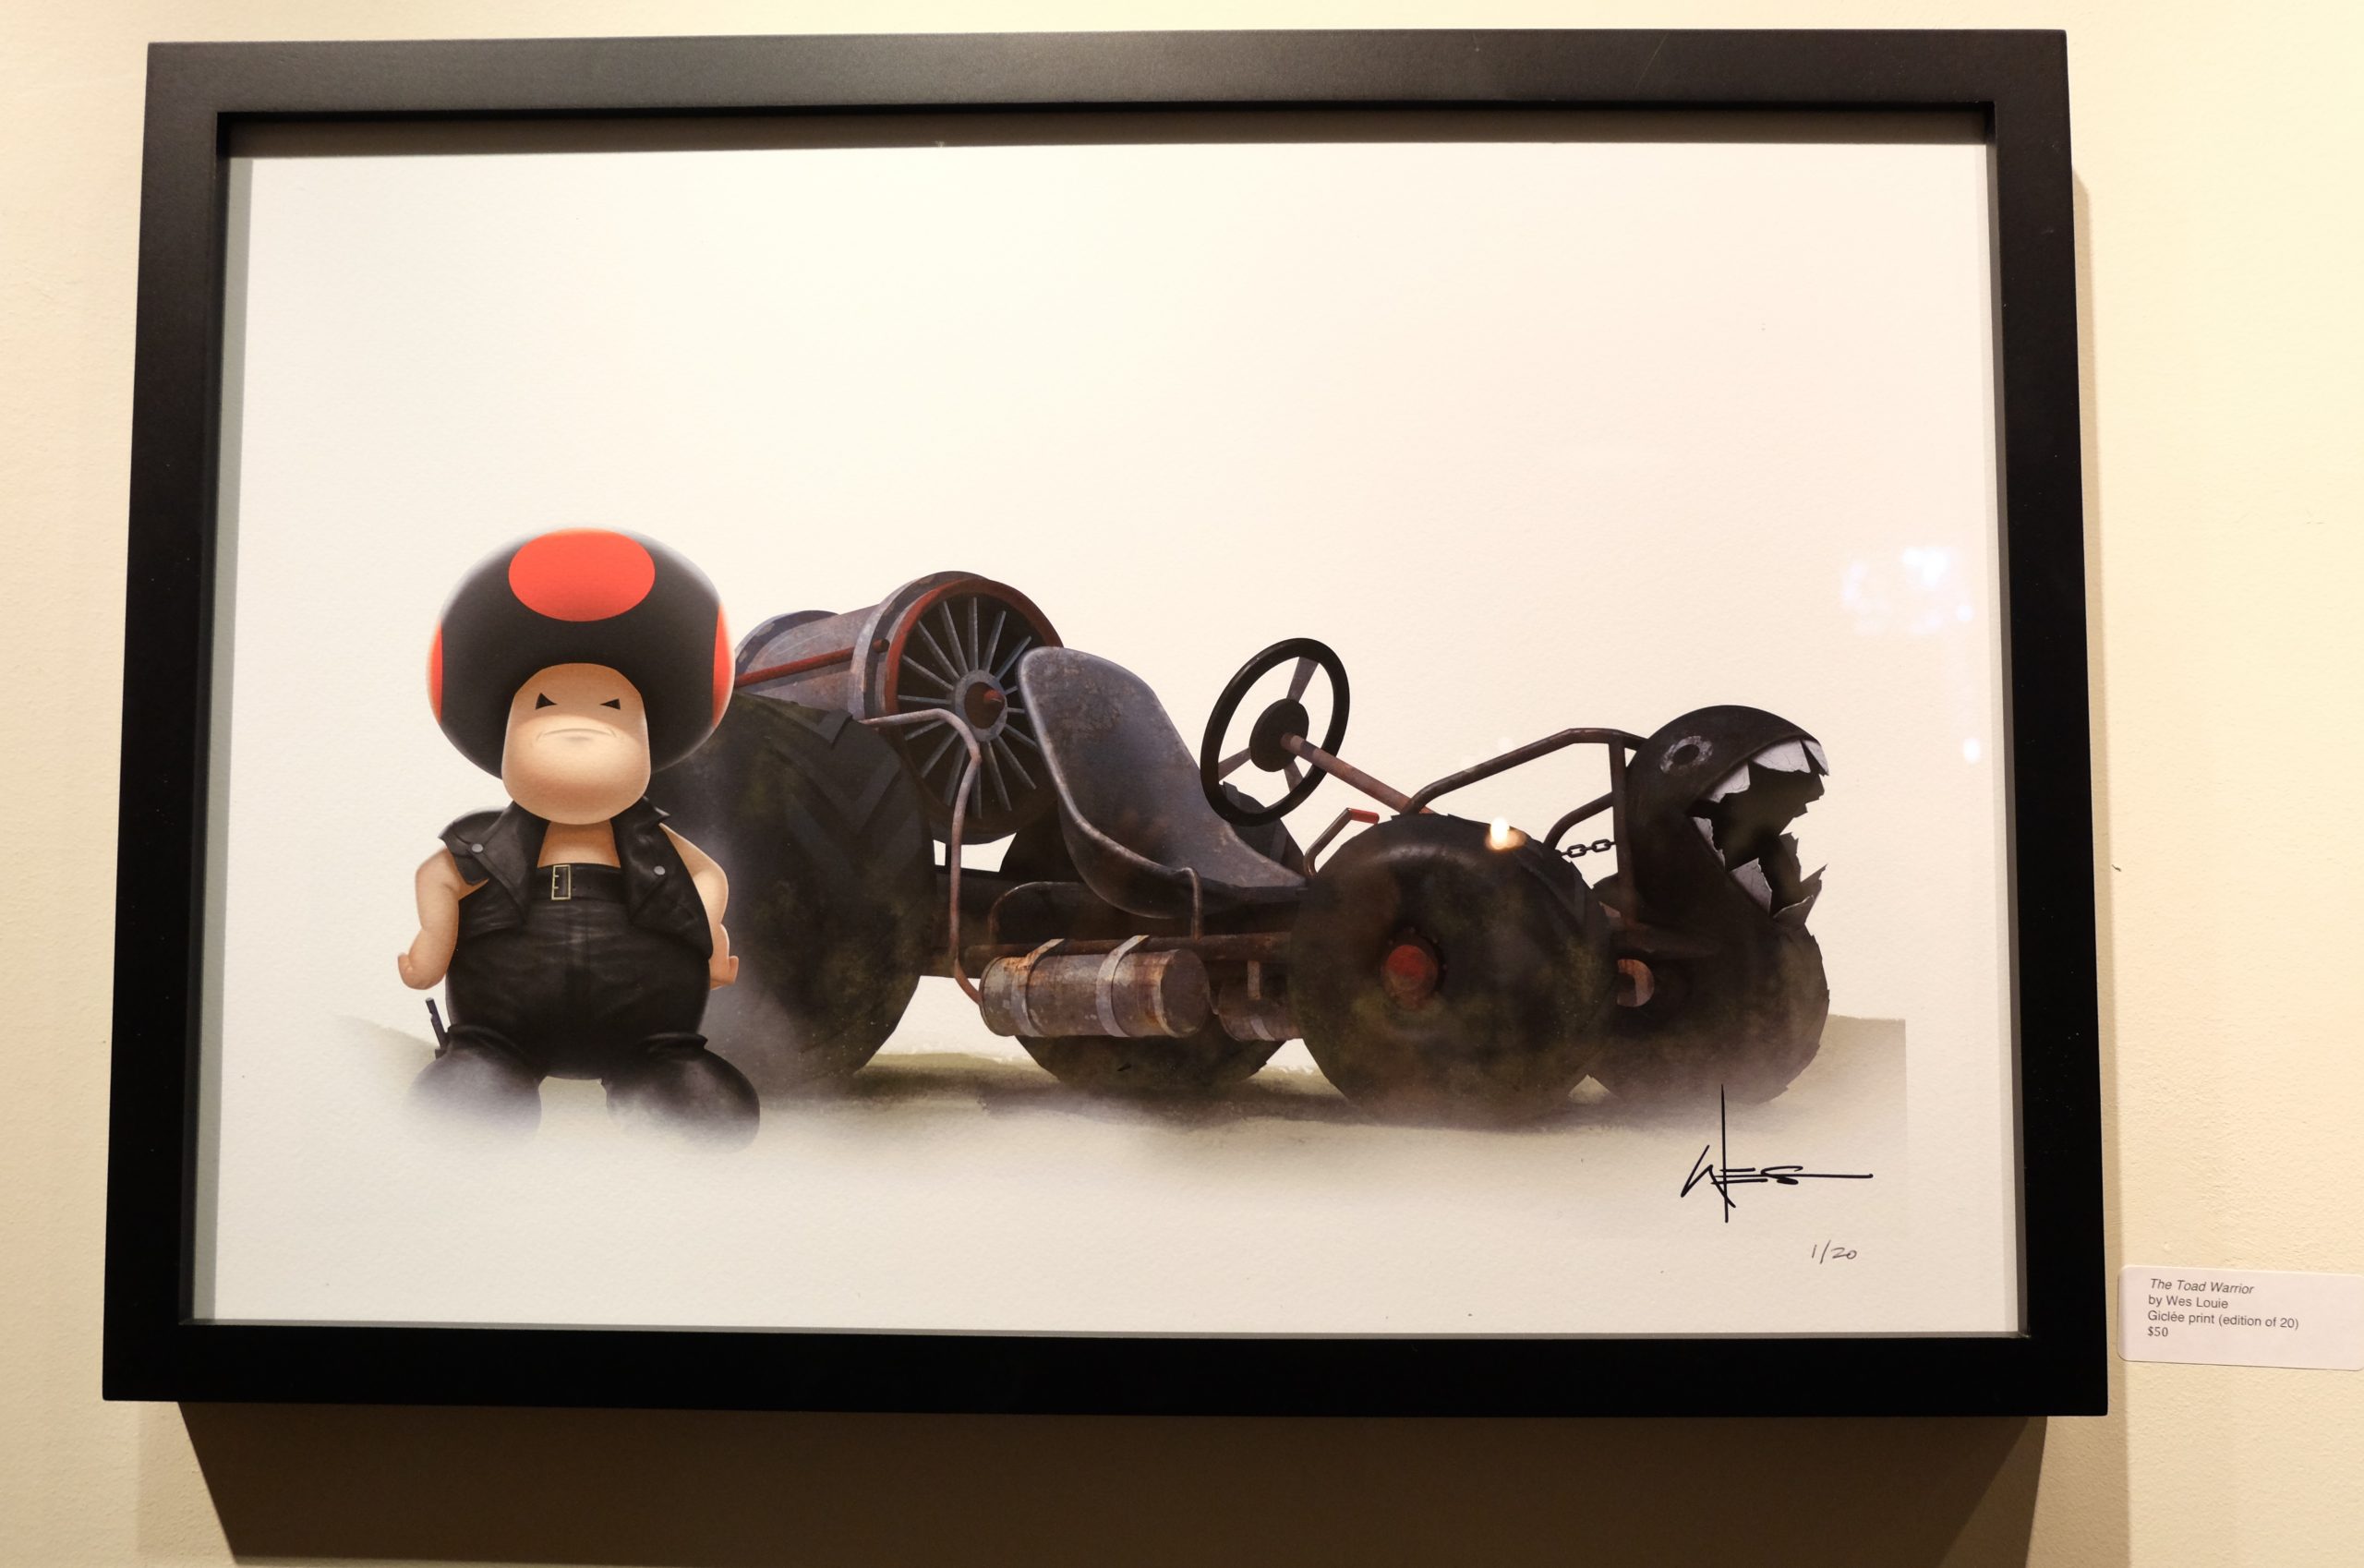 Our Favorite Photos from the iam8bit 10th Anniversary Gallery